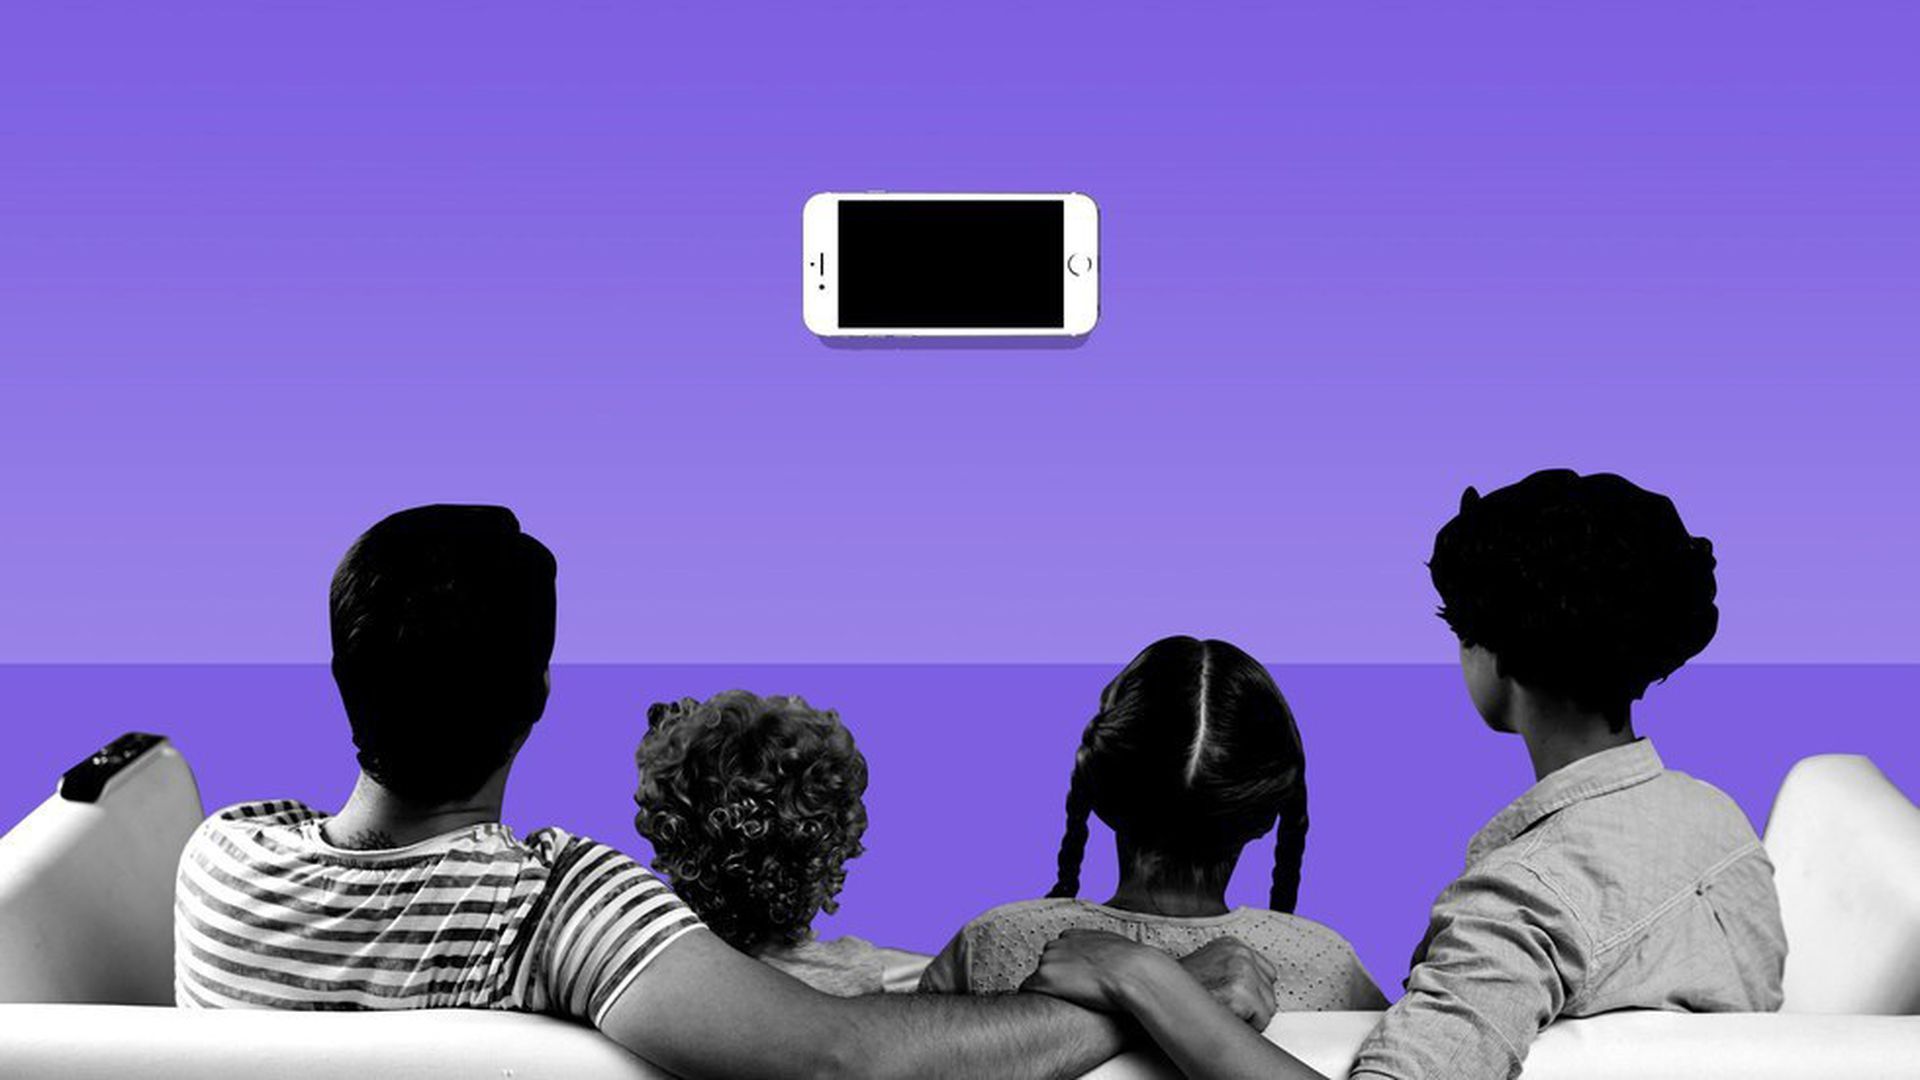 Illustration of family on couch looking at an iPhone stuck to the wall instead of a TV